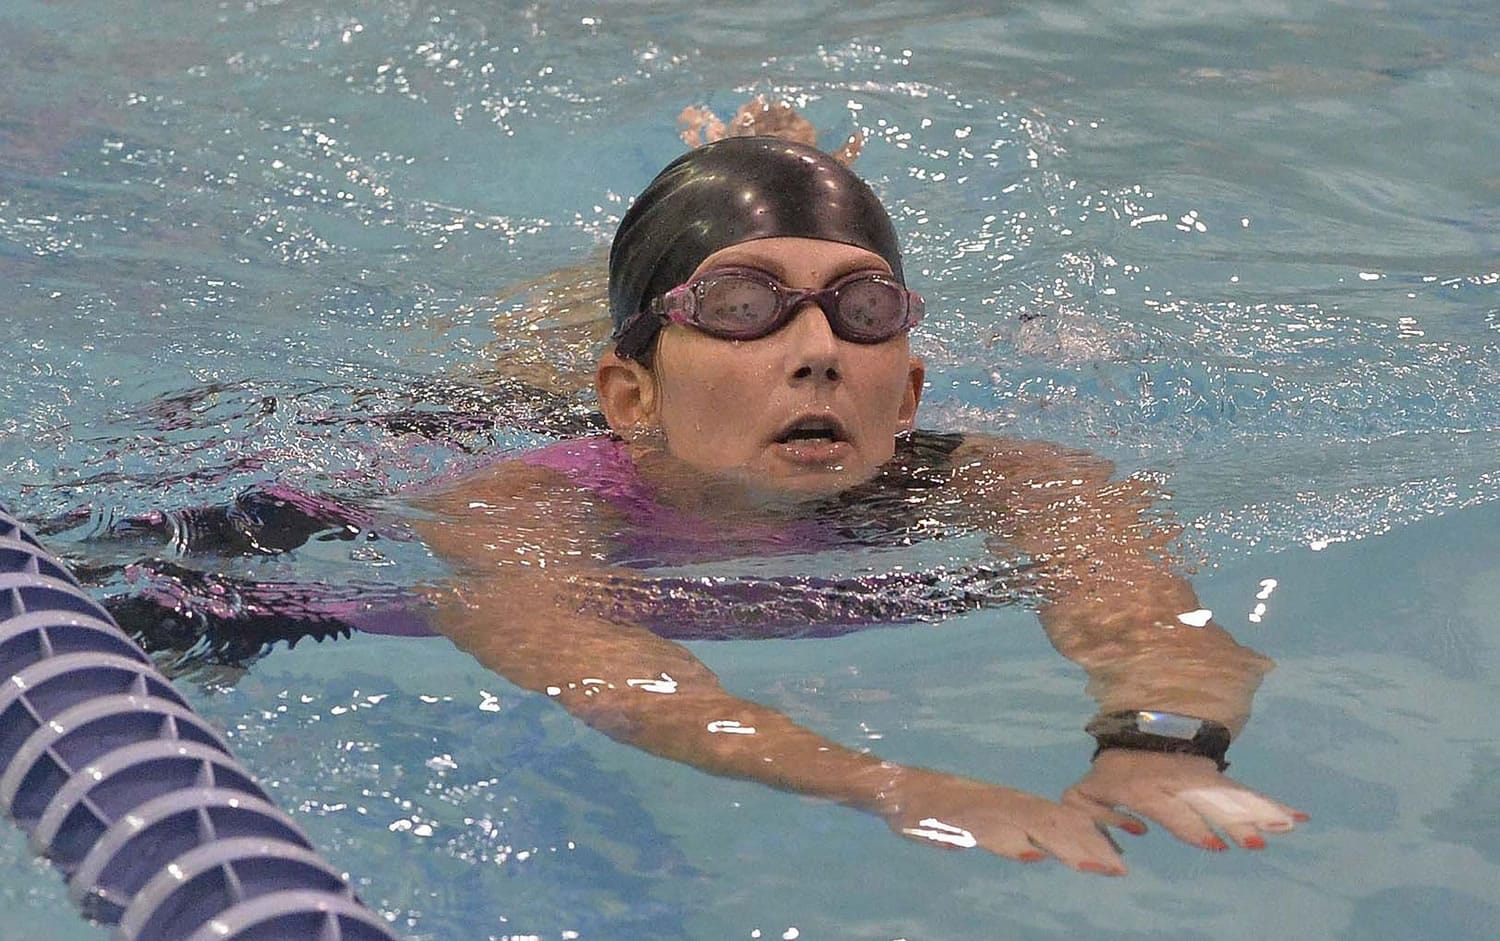 Tonya Hanna swims laps to work on her endurance during a swim lesson.